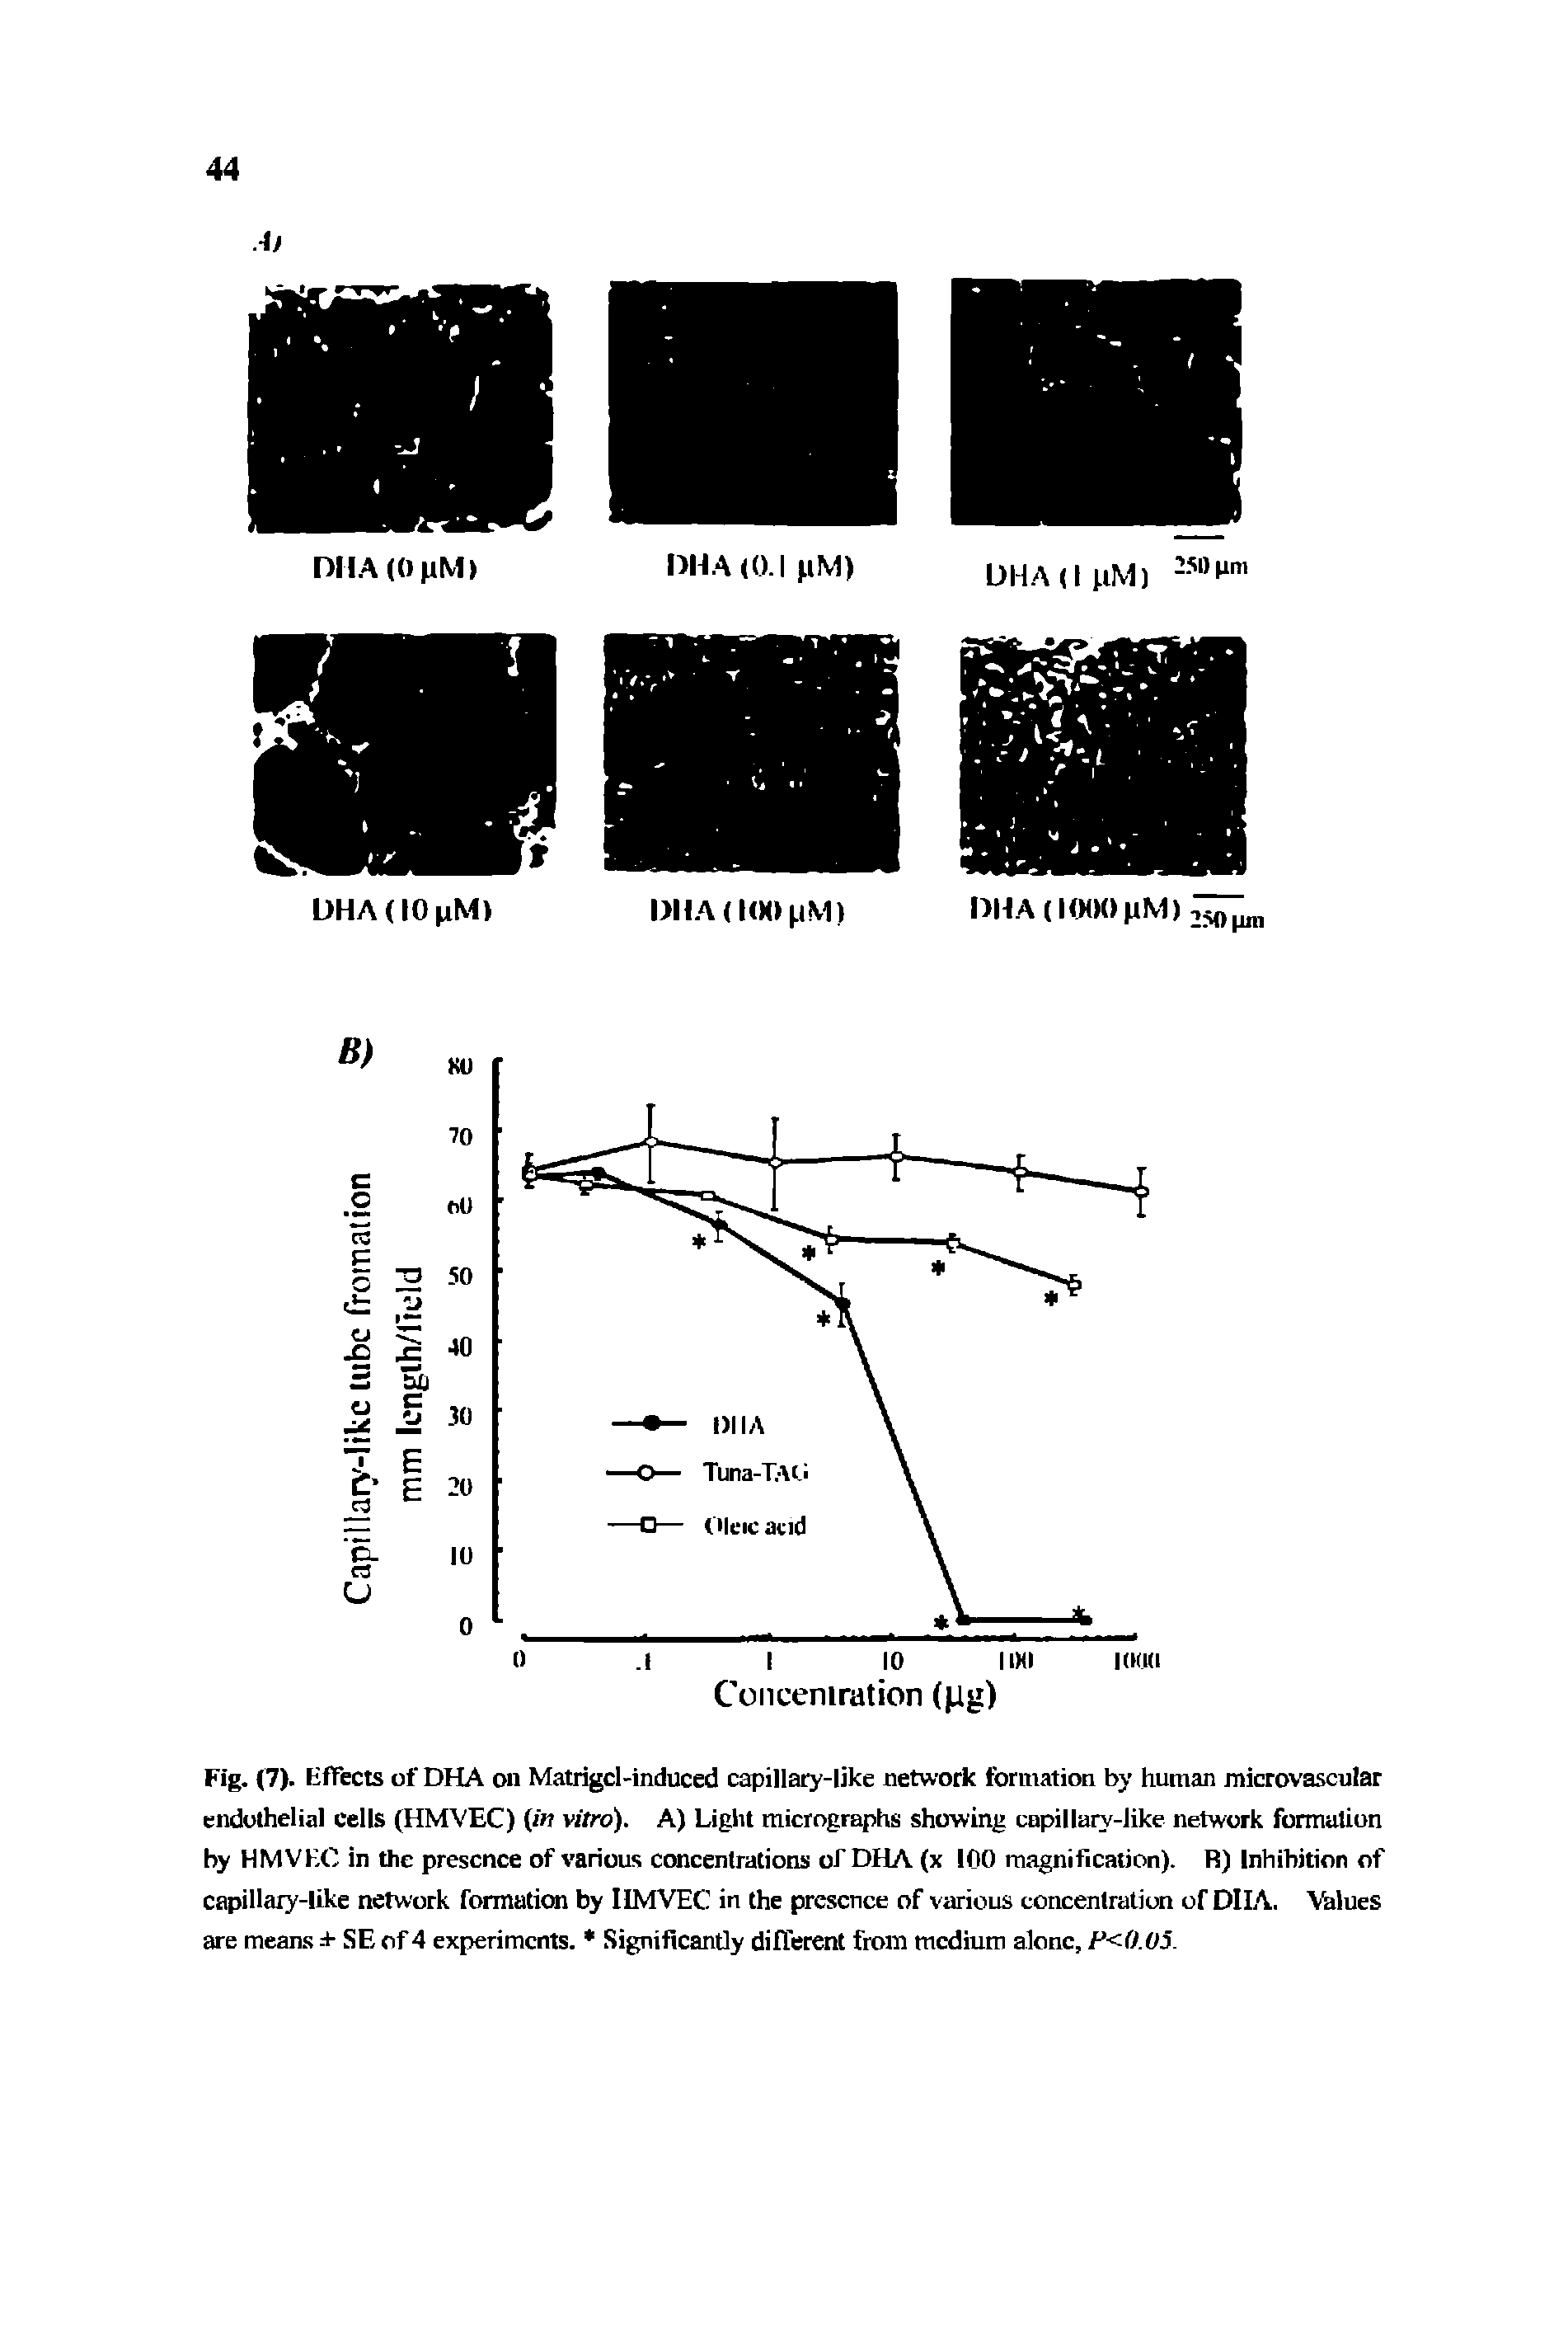 Fig. (7). Effects of DHA on Matrigcl-induced capillary-like network formation by human microvascular endothelial cells (HMVEC) in vitro). A) Light micrographs showing capillary-like network formation by HMVKC in the presence of various concentrations of DHA (x 100 magnification). R) Inhibition of capillary-like network formation by IIMVEC in the presence of various concentration of DI1A. Values are means a- SE of 4 experiments. Significantly different from medium alone, F<0.05.